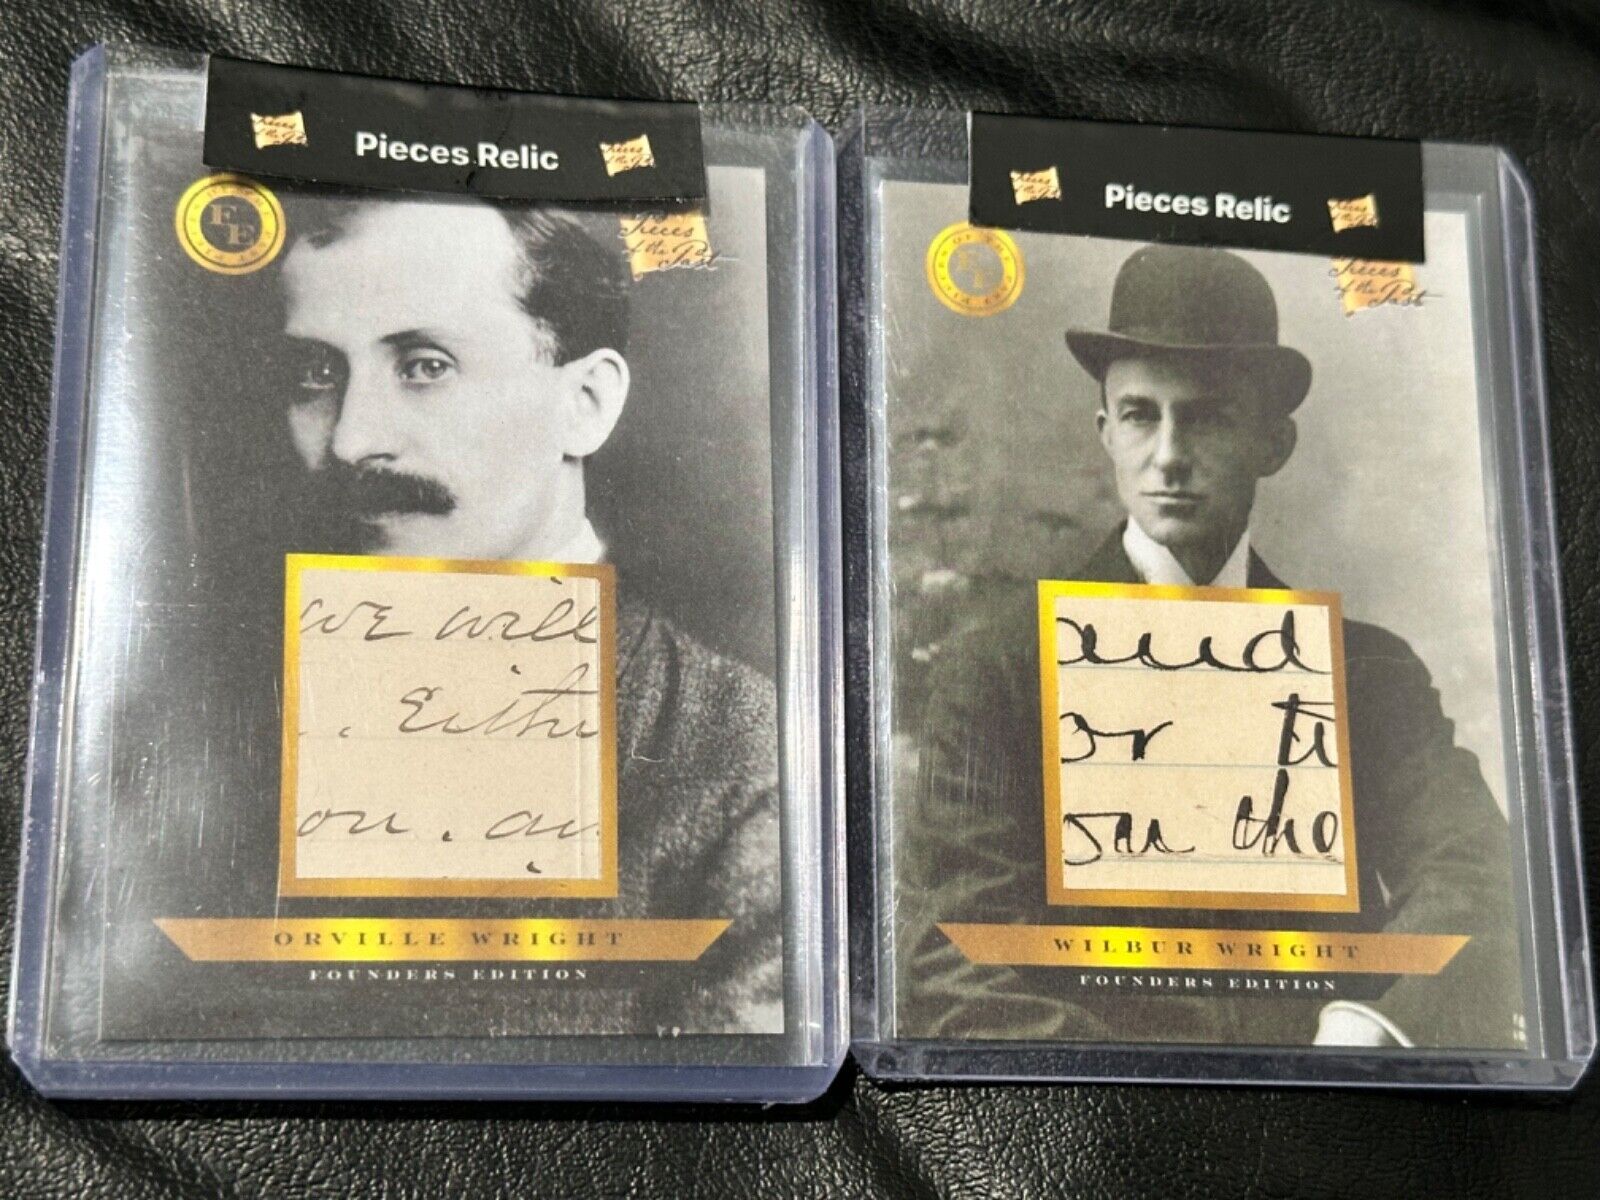 THE WRIGHT BROTHERS - INVENTORS OF AIRPLANES - HANDWRITTEN RELIC CARDS